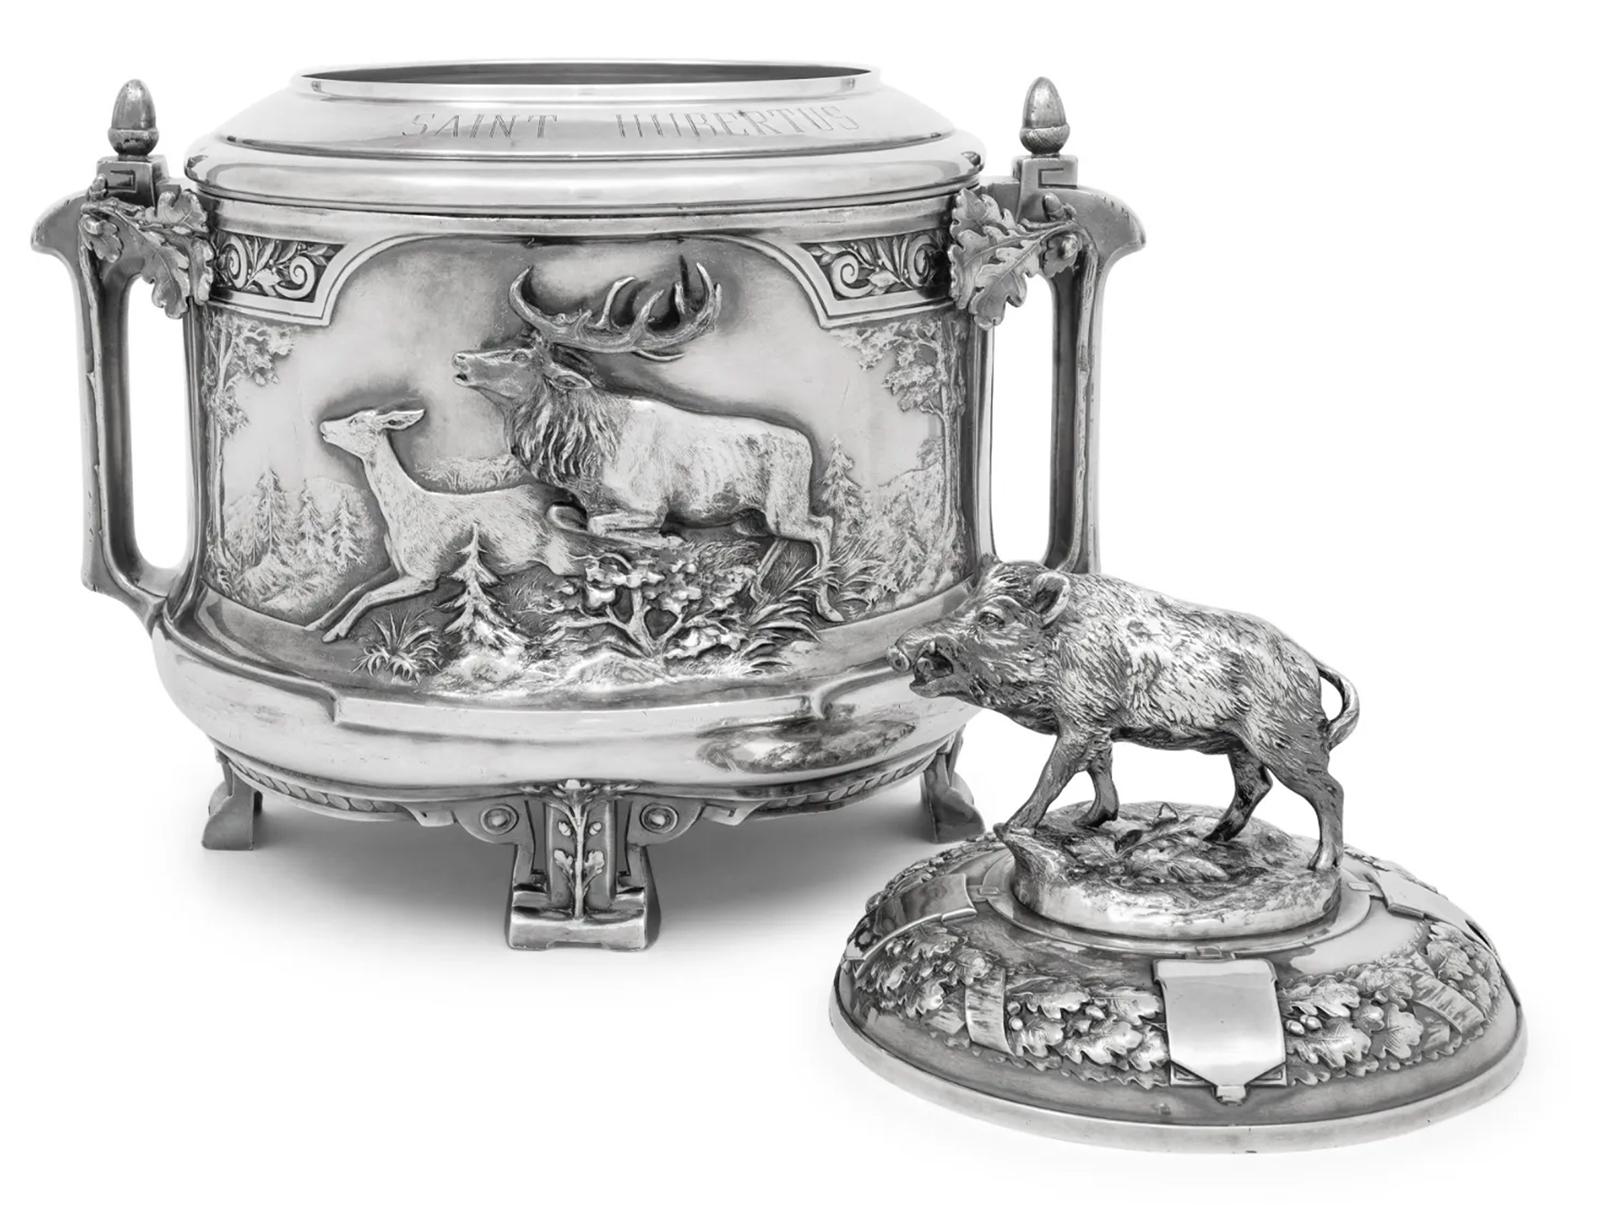 Silver Plate Early 20th Century German Silver-Plate Tureen For Sale